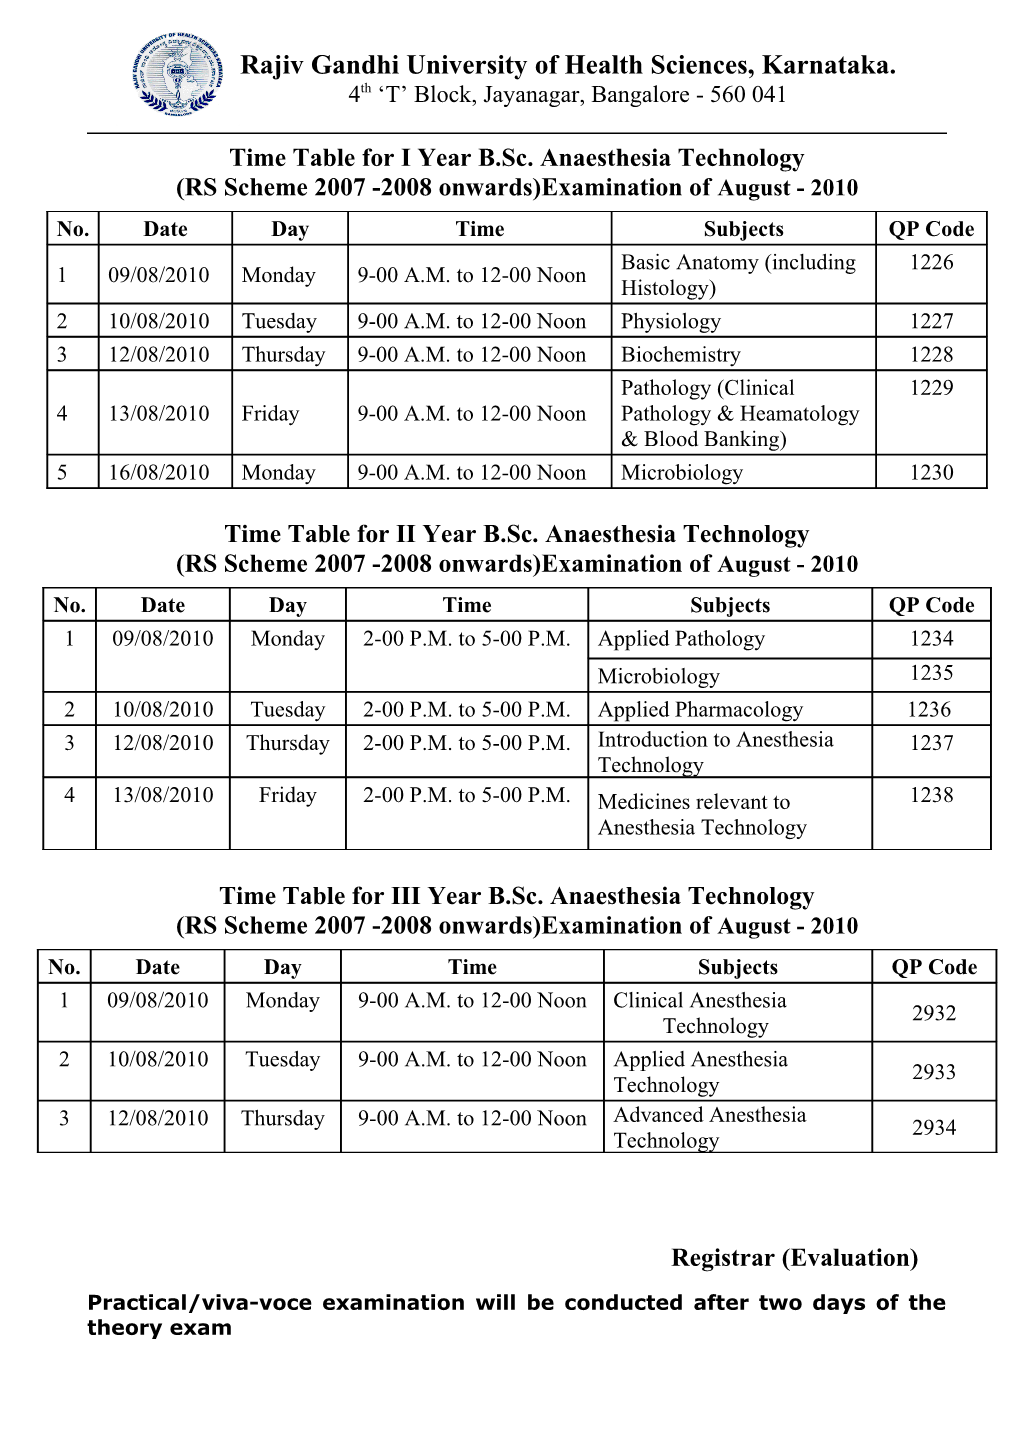 Time Table for I Year B